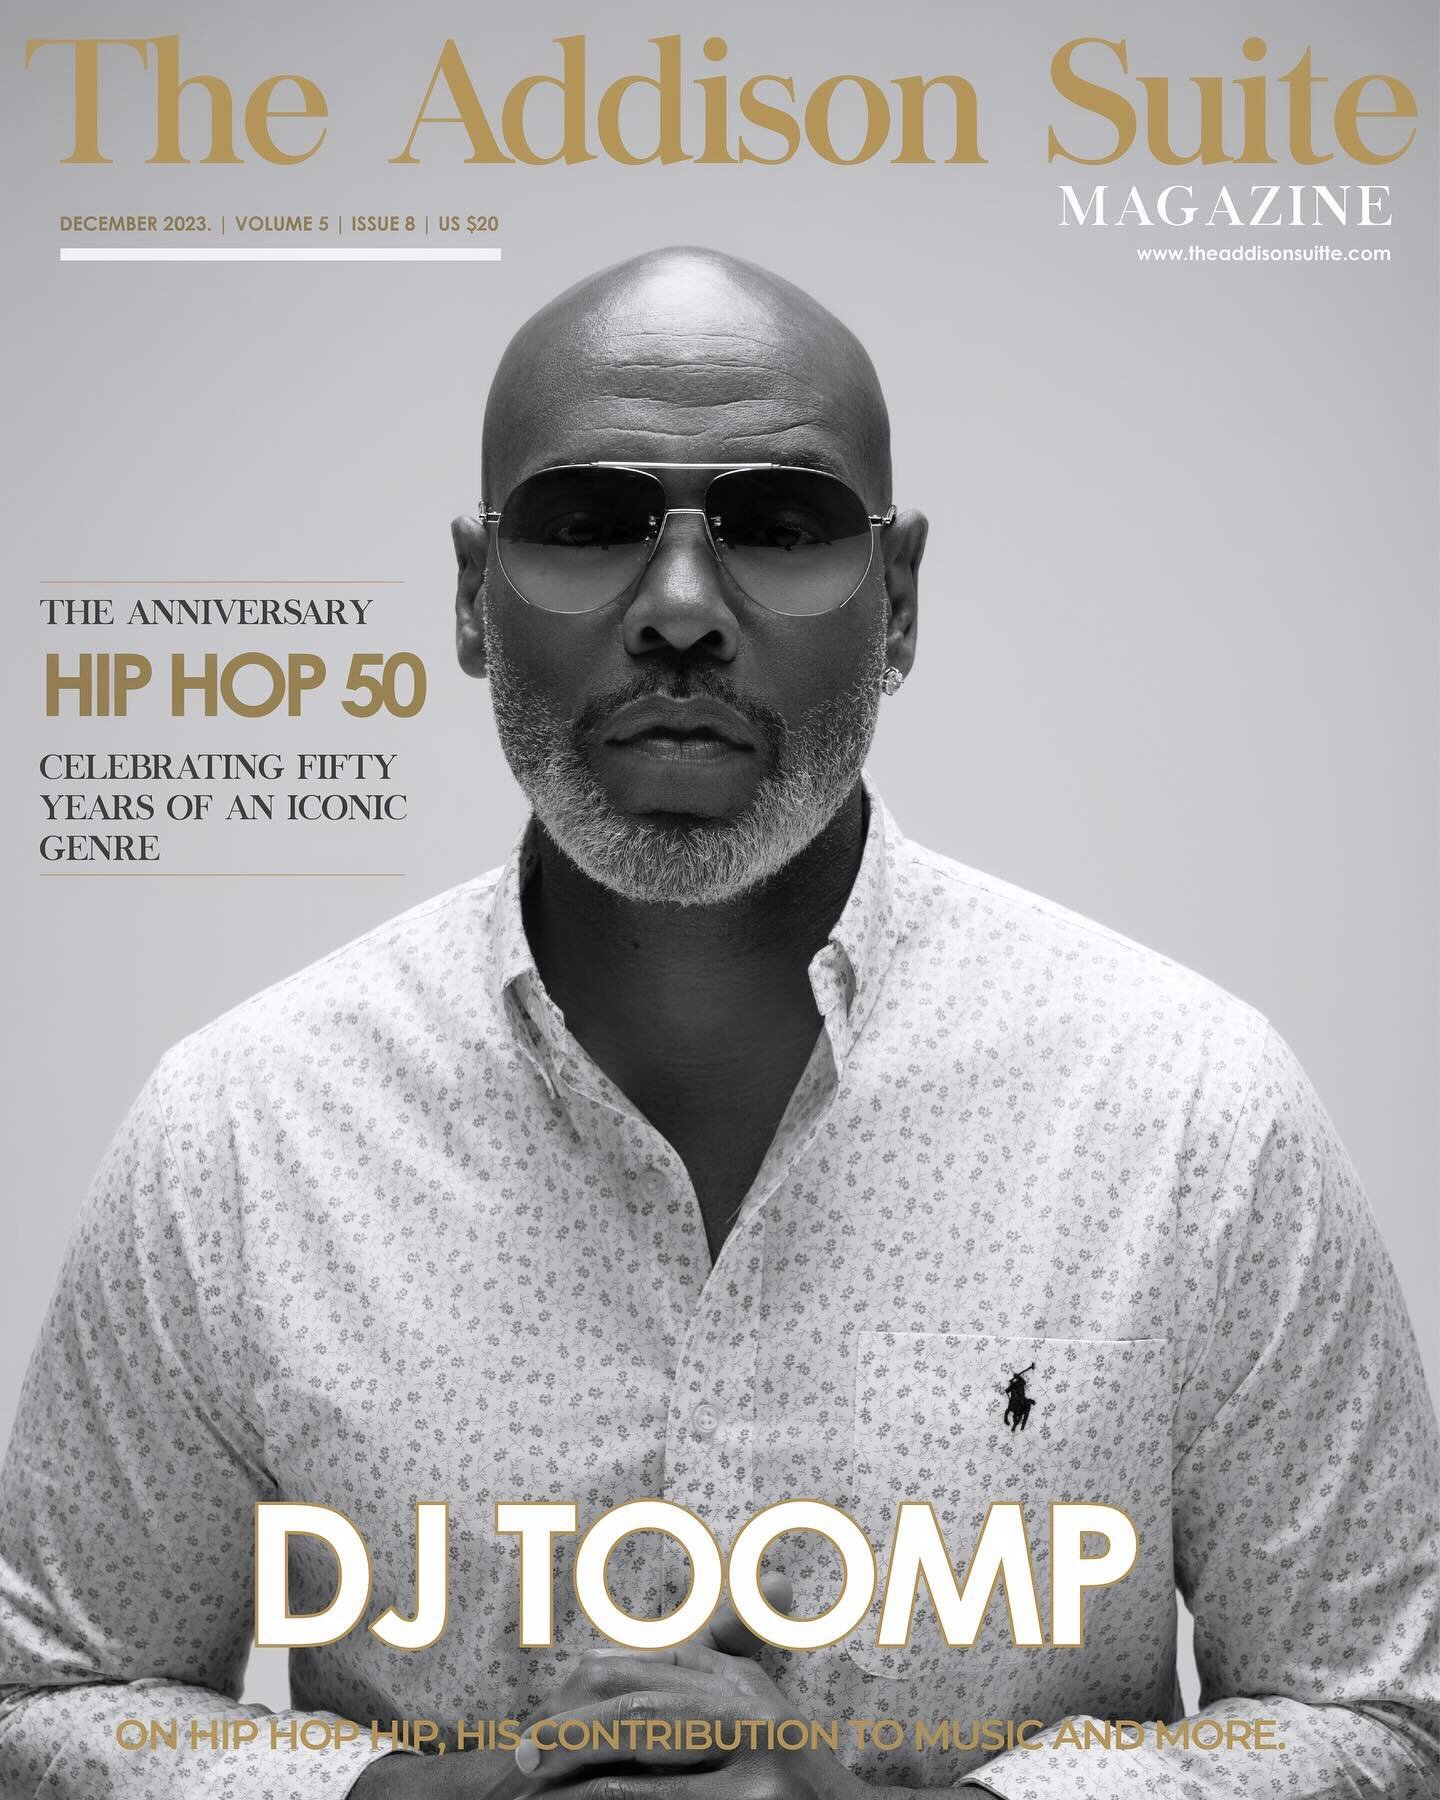 The Addison Suite Magazine FW23 Hip Hop 50 Issue feat @dj_toomp and @edlover available now!!!

Please log on to www.theaddisonsuite.com to purchase the special edition hard copies.

#theaddisonsuitemagazine #luxury #hiphop50 #music #rap #grammy #yomt